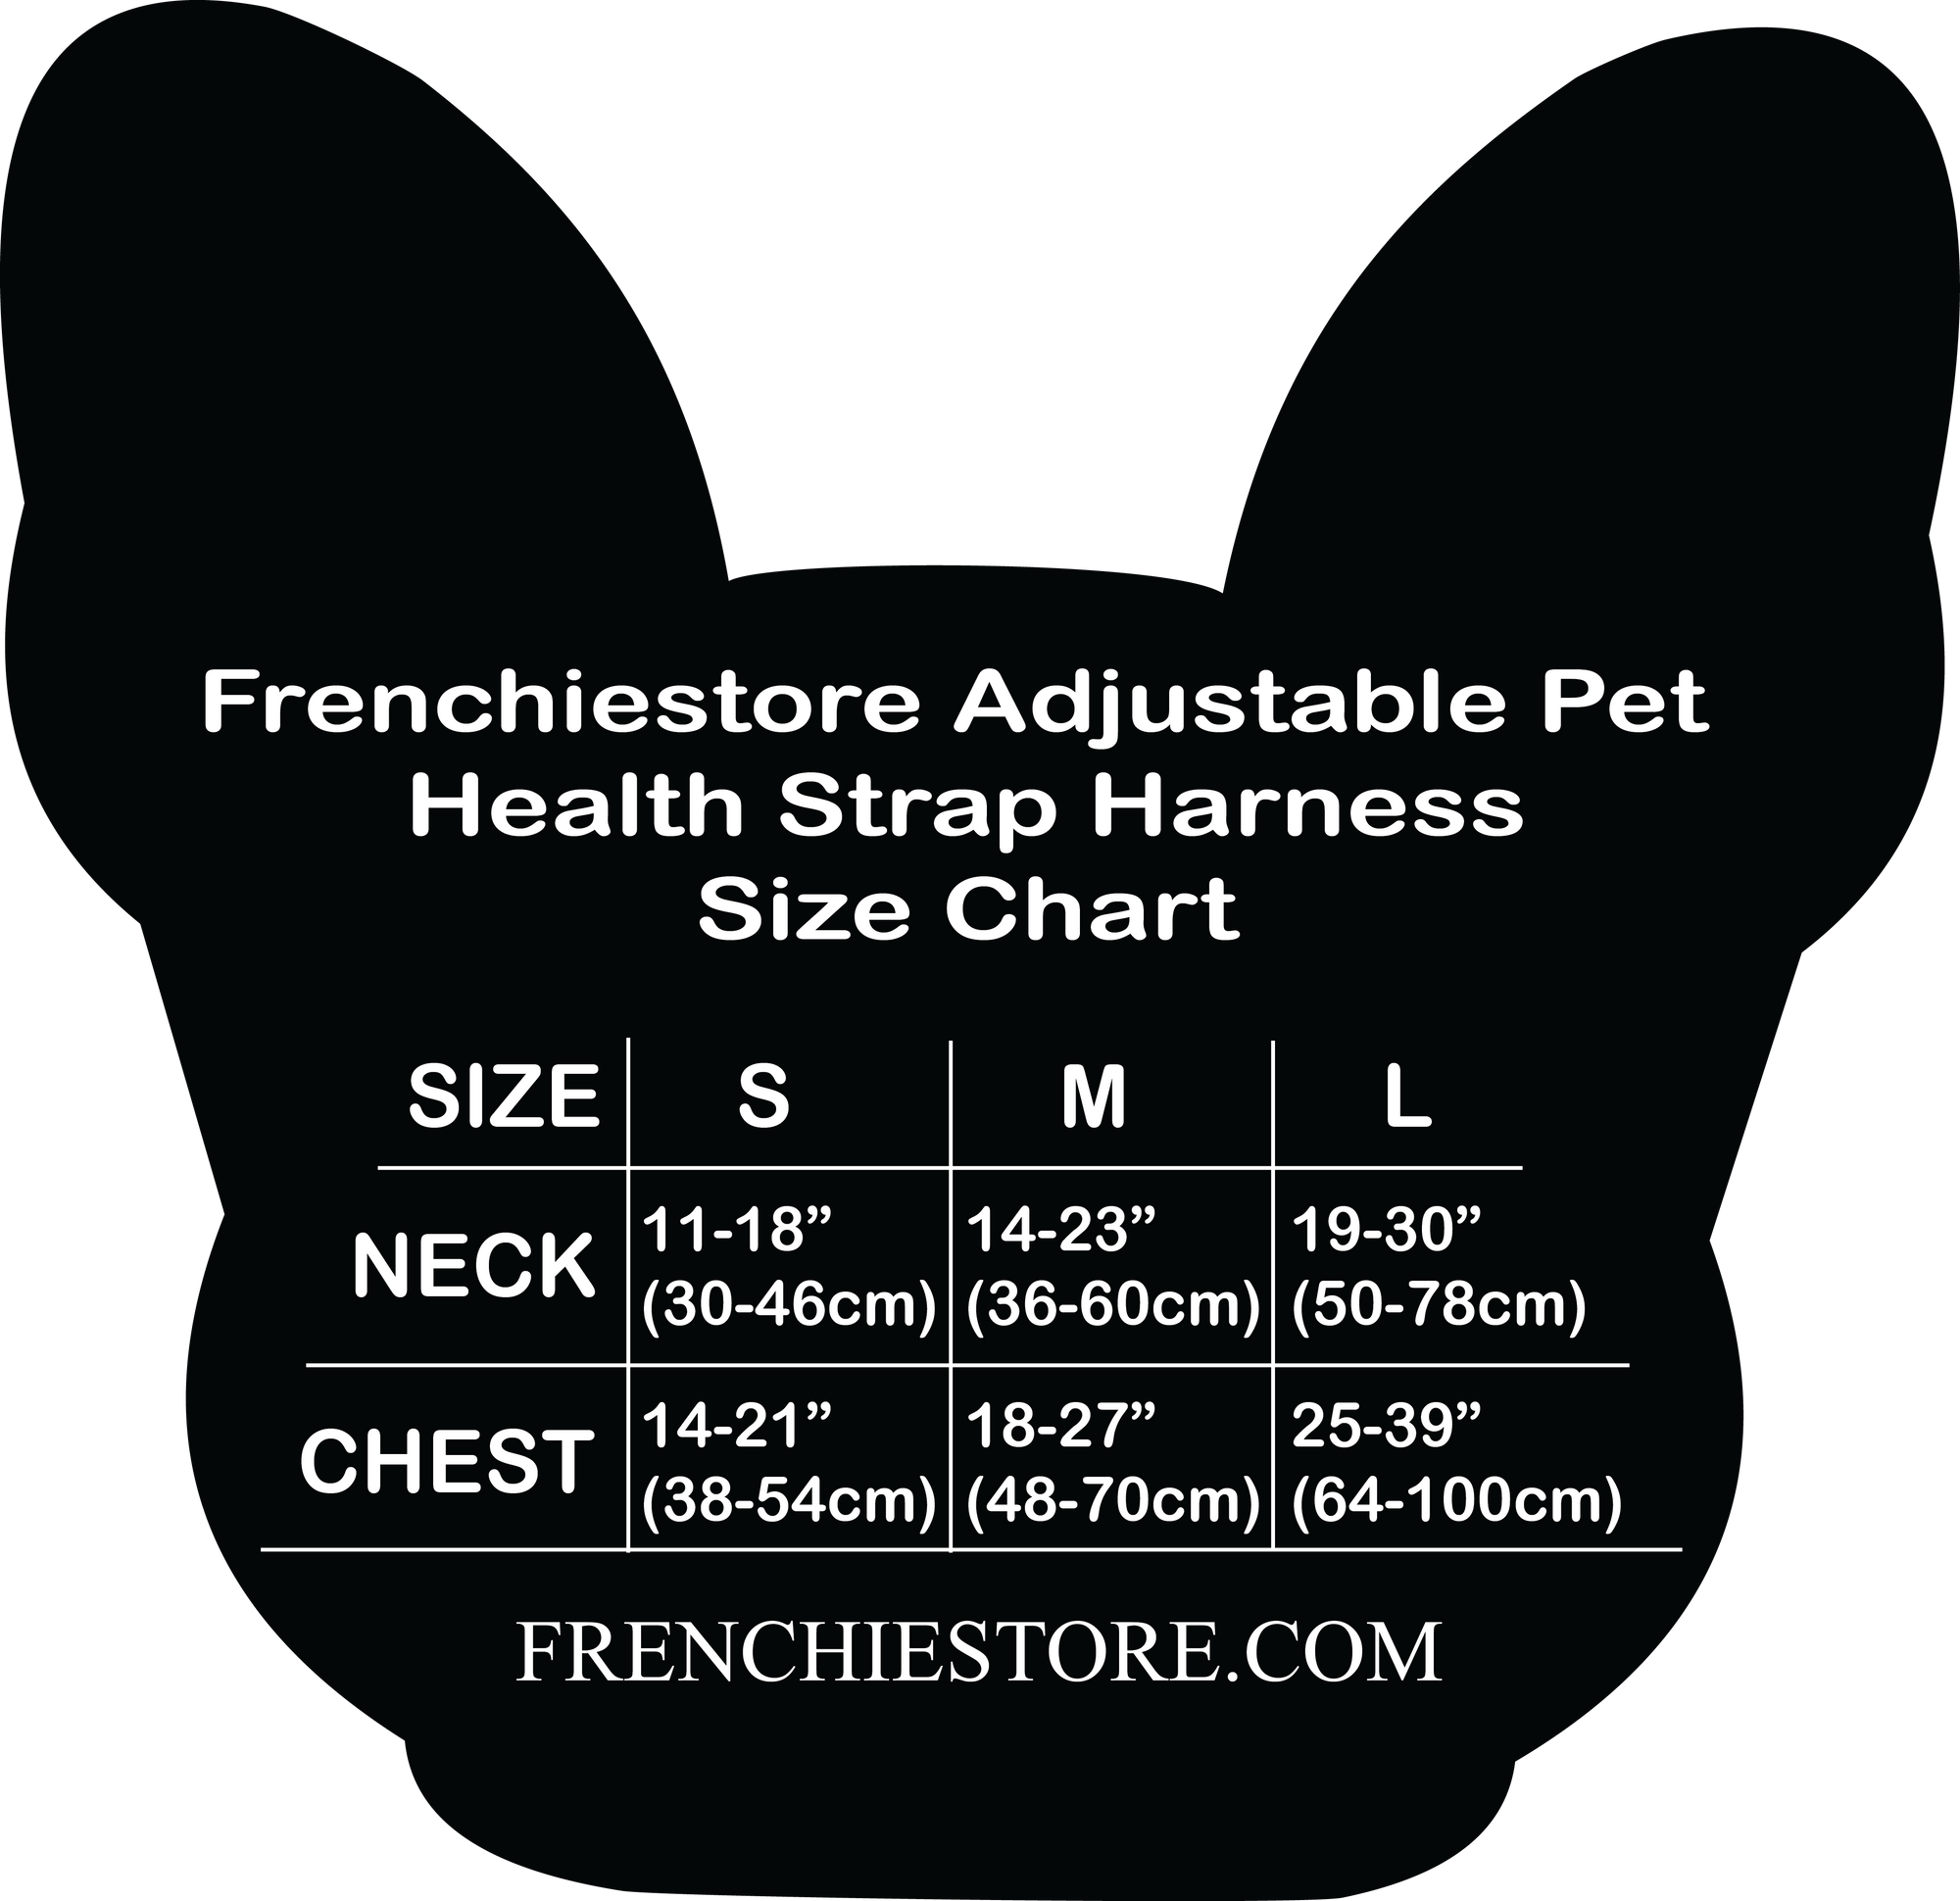 Frenchiestore Adjustable Pet Health Strap Harness | the Child, Frenchie Dog, French Bulldog pet products